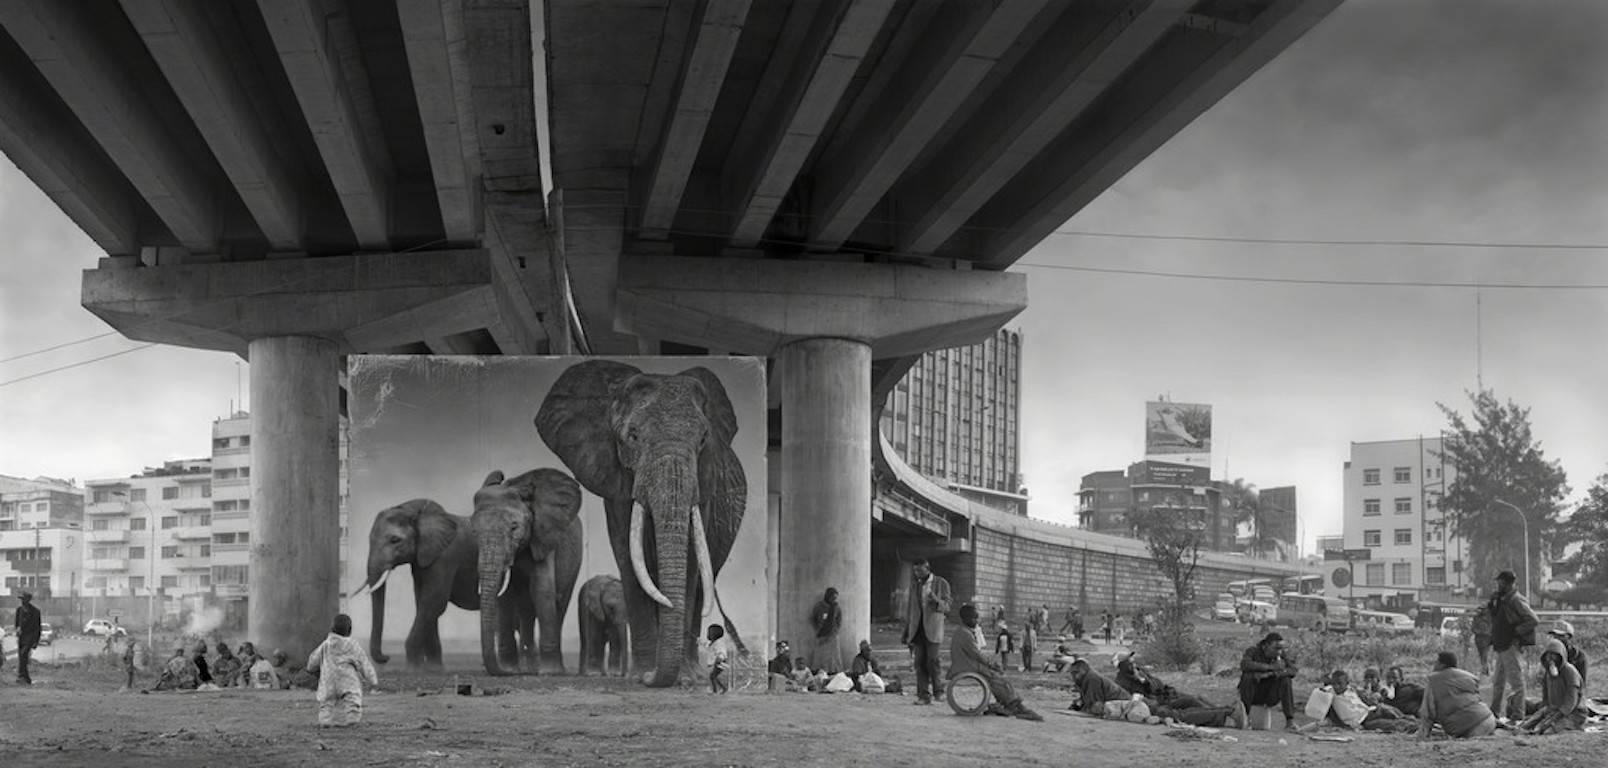 Underpass With Elephant (Lean back your life is on track)

Signed, numbered and dated on artist’s label
Edition of 15

Born in England, Nick Brandt has devoted his photographic career to showing the disappearing natural world of East Africa, and its